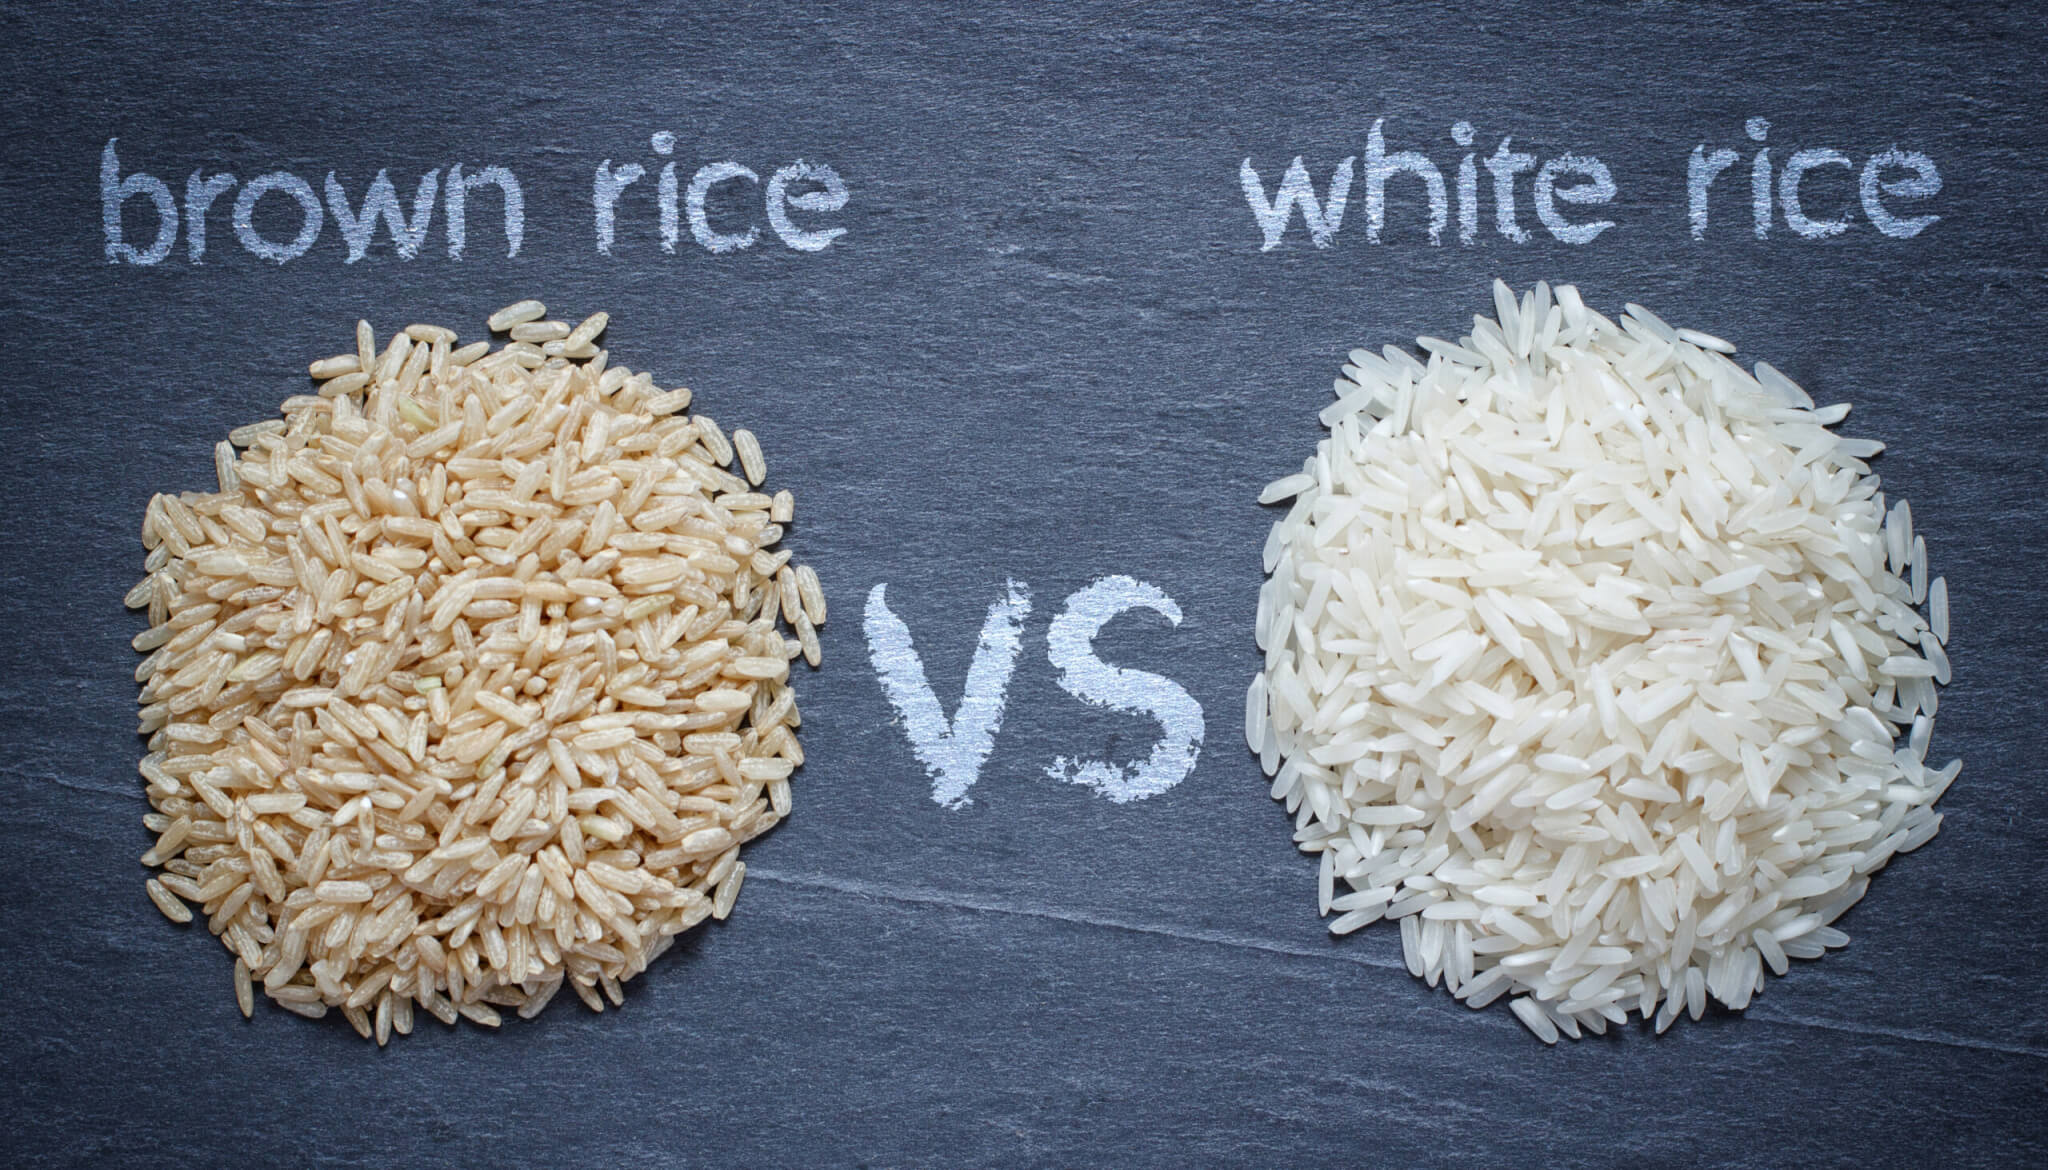 No, brown rice is not healthier than white rice